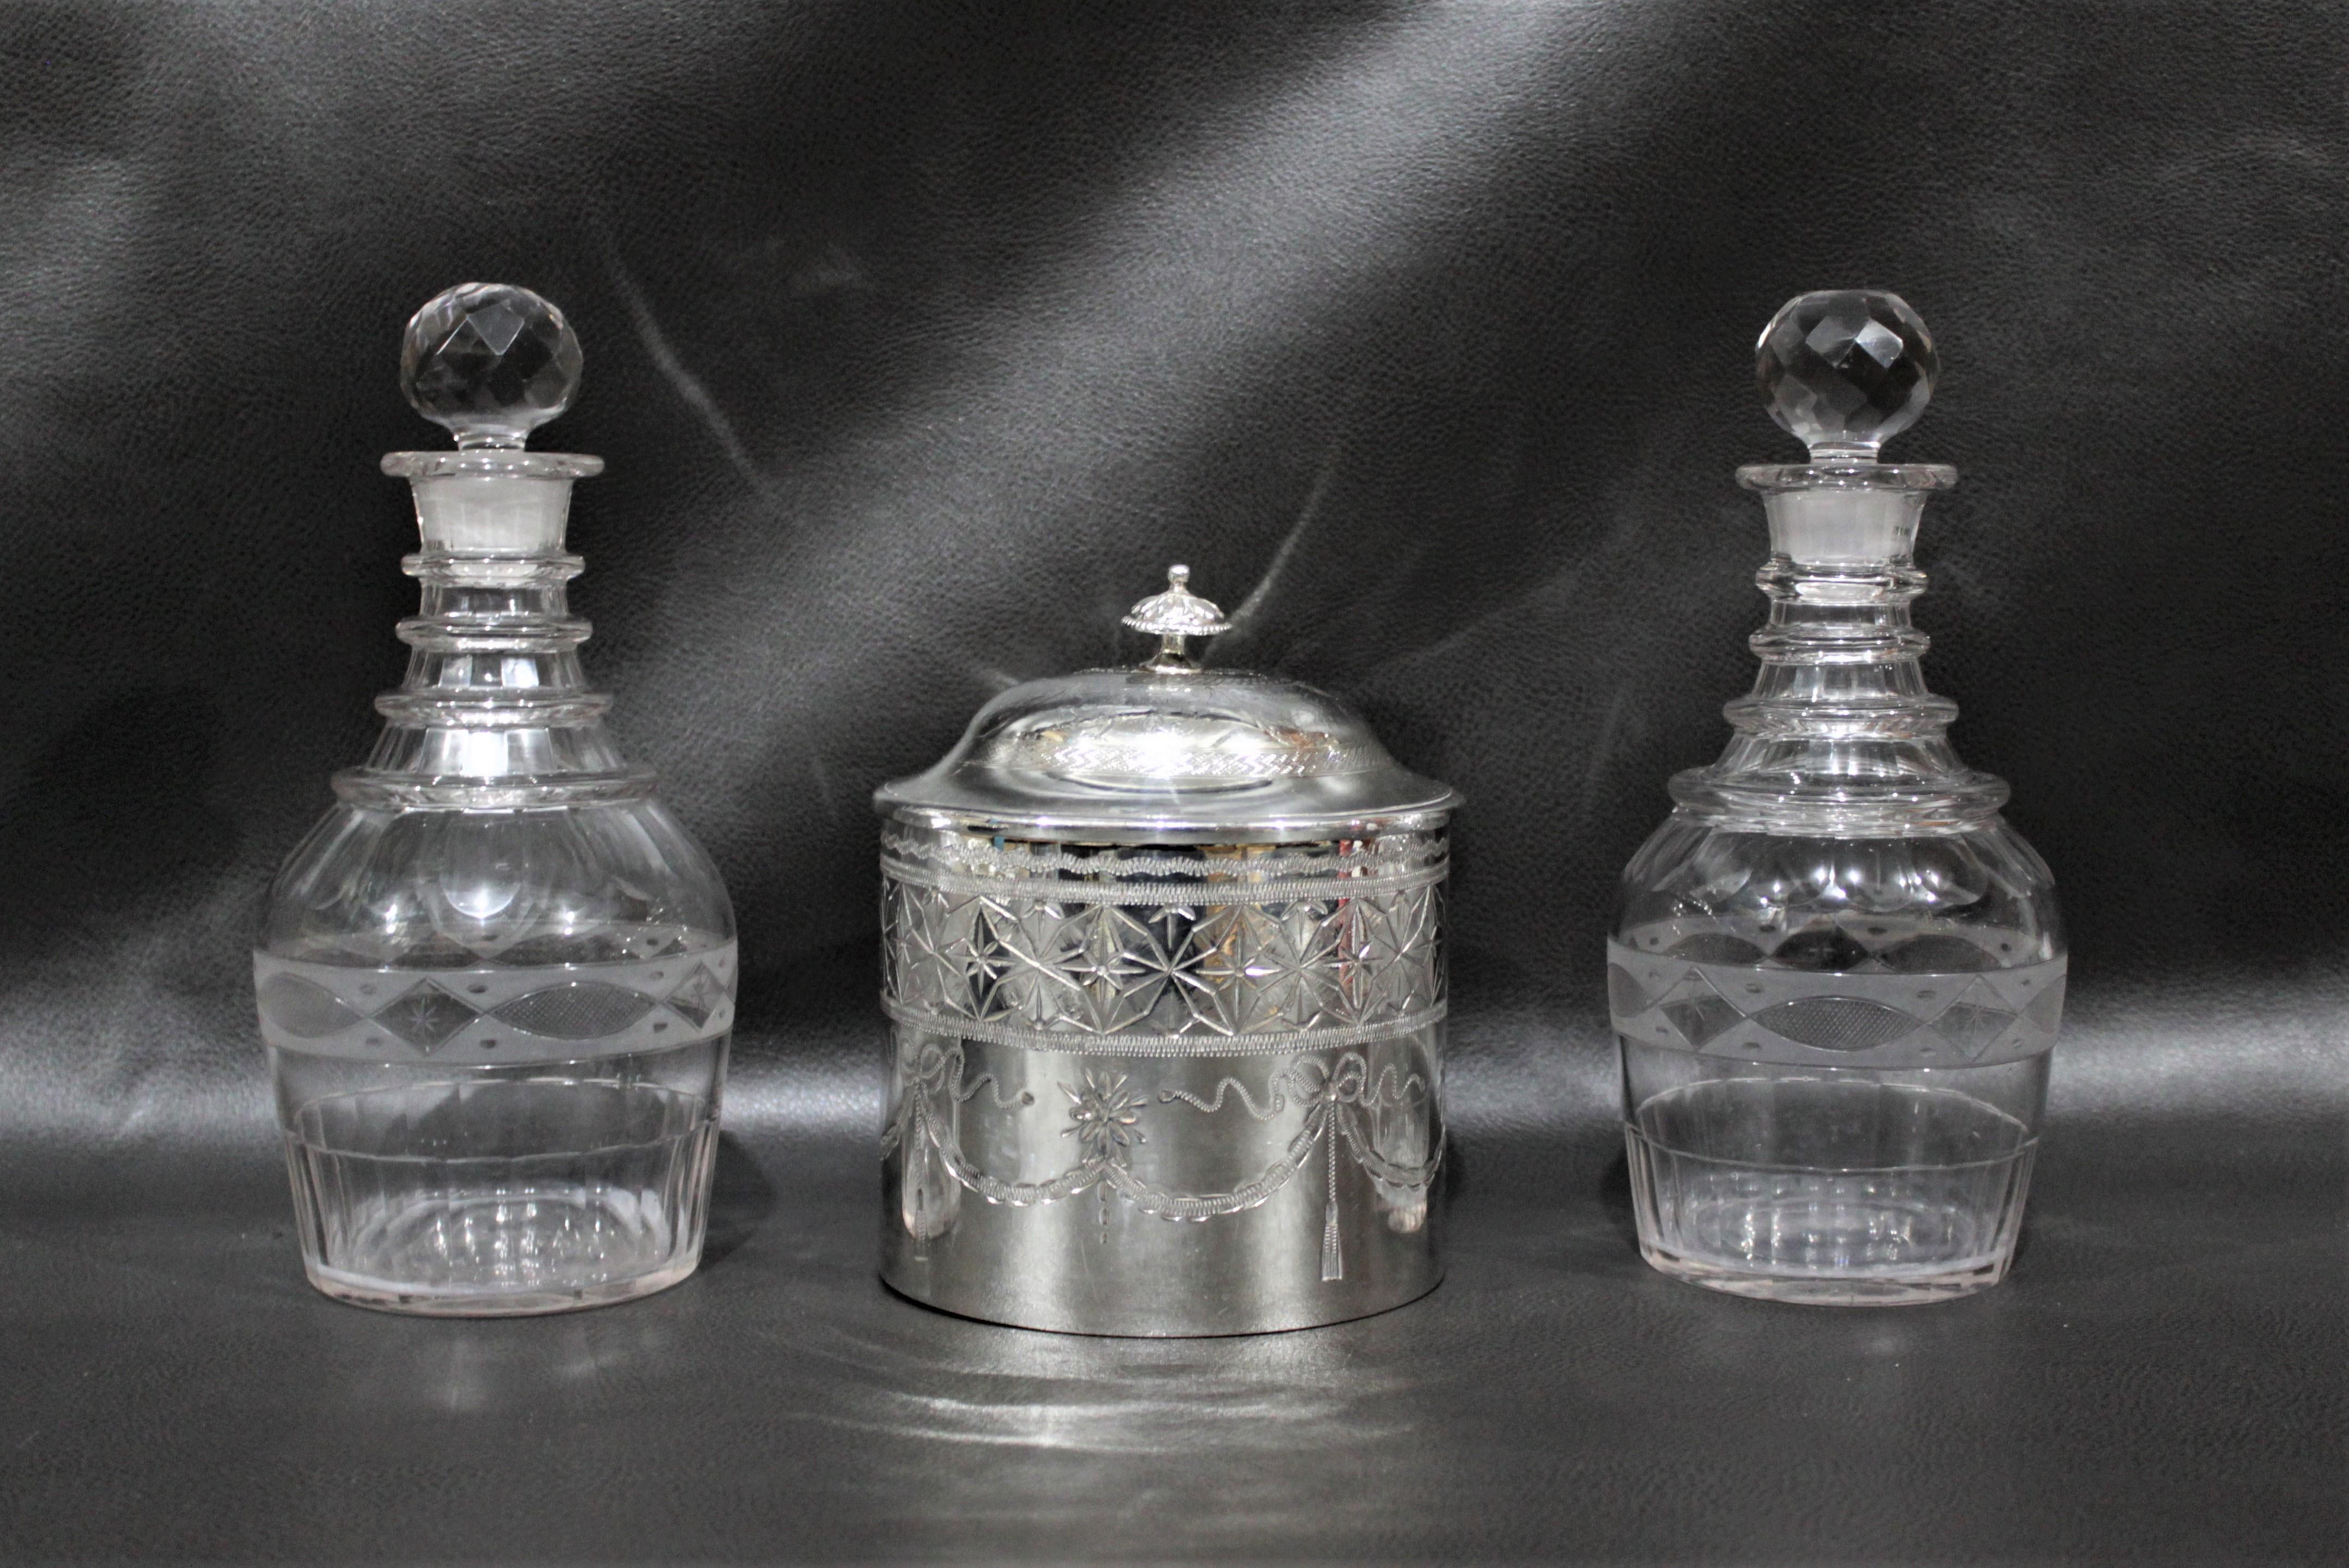 20th Century Antique Silver Plated Sherry Stand with Glass Decanters and Biscuit Barrel